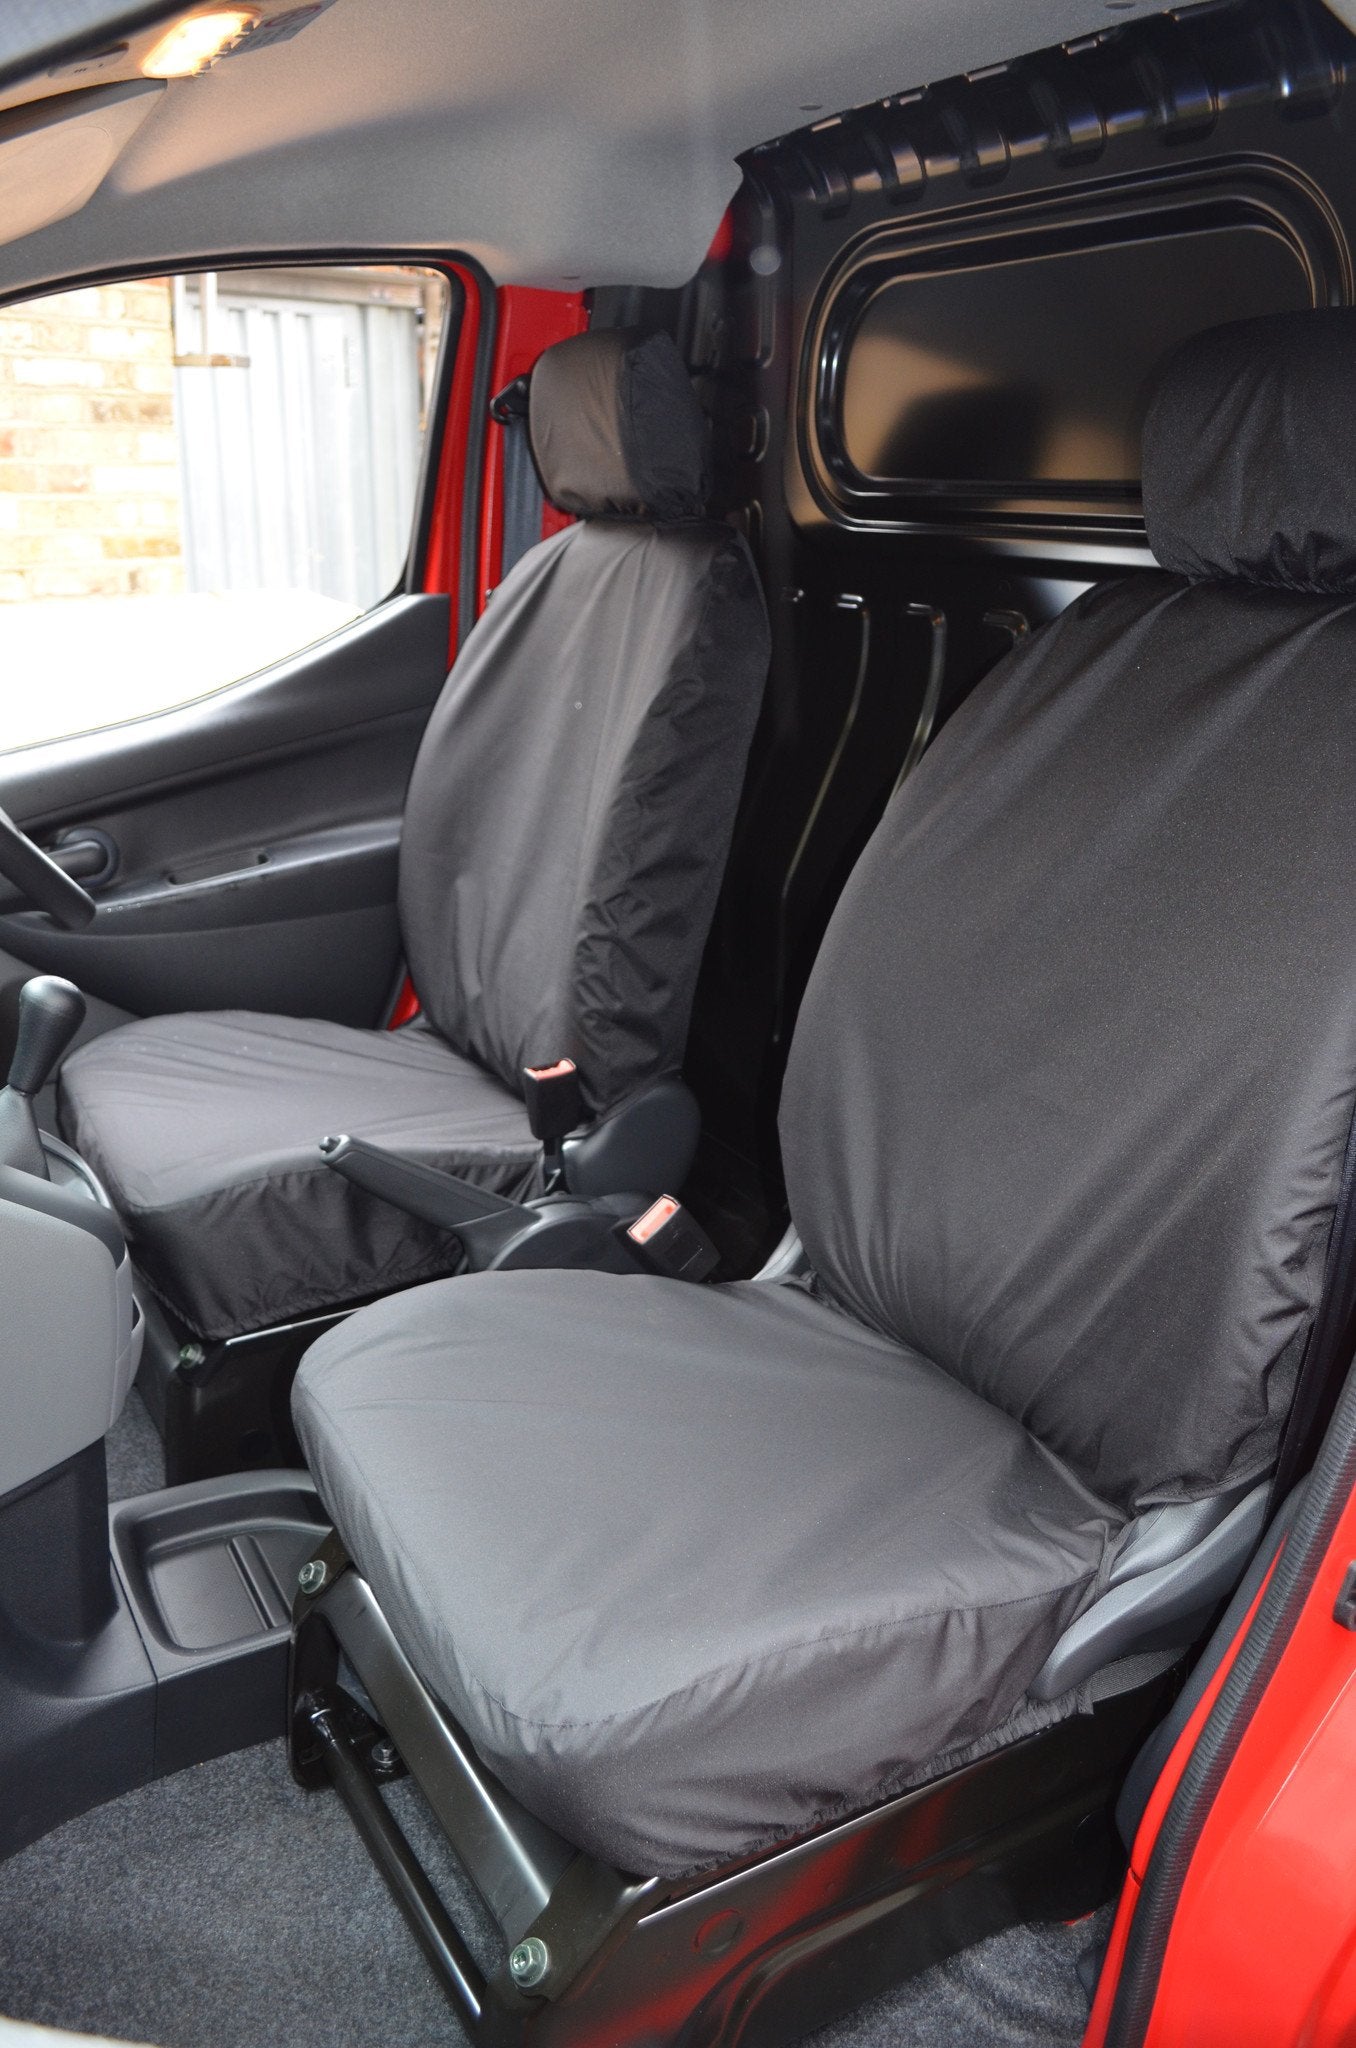 Nissan NV200 Van 2009 Onwards Tailored Front Seat Covers Black / Non-Folding Turtle Covers Ltd